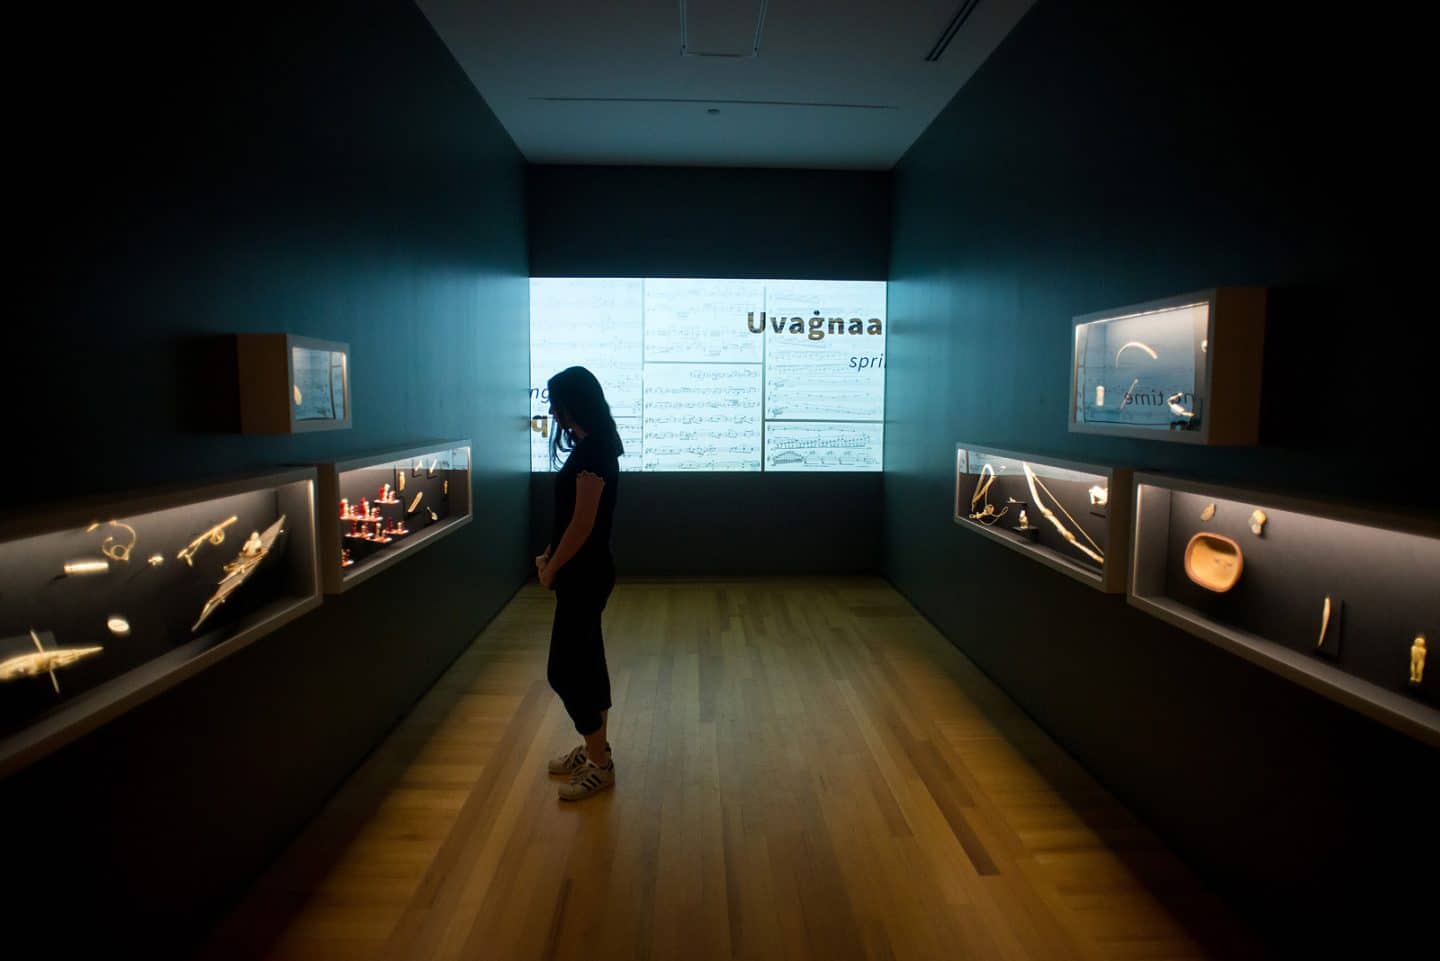 Heidi Senungetuk’s Qutaaŋuaqtuit: Dripping Music with thirty-three cultural belongings displayed with playful dramatic flare at Agnes Etherington Art Centre as part of Soundings: An Exhibition in Five Parts.